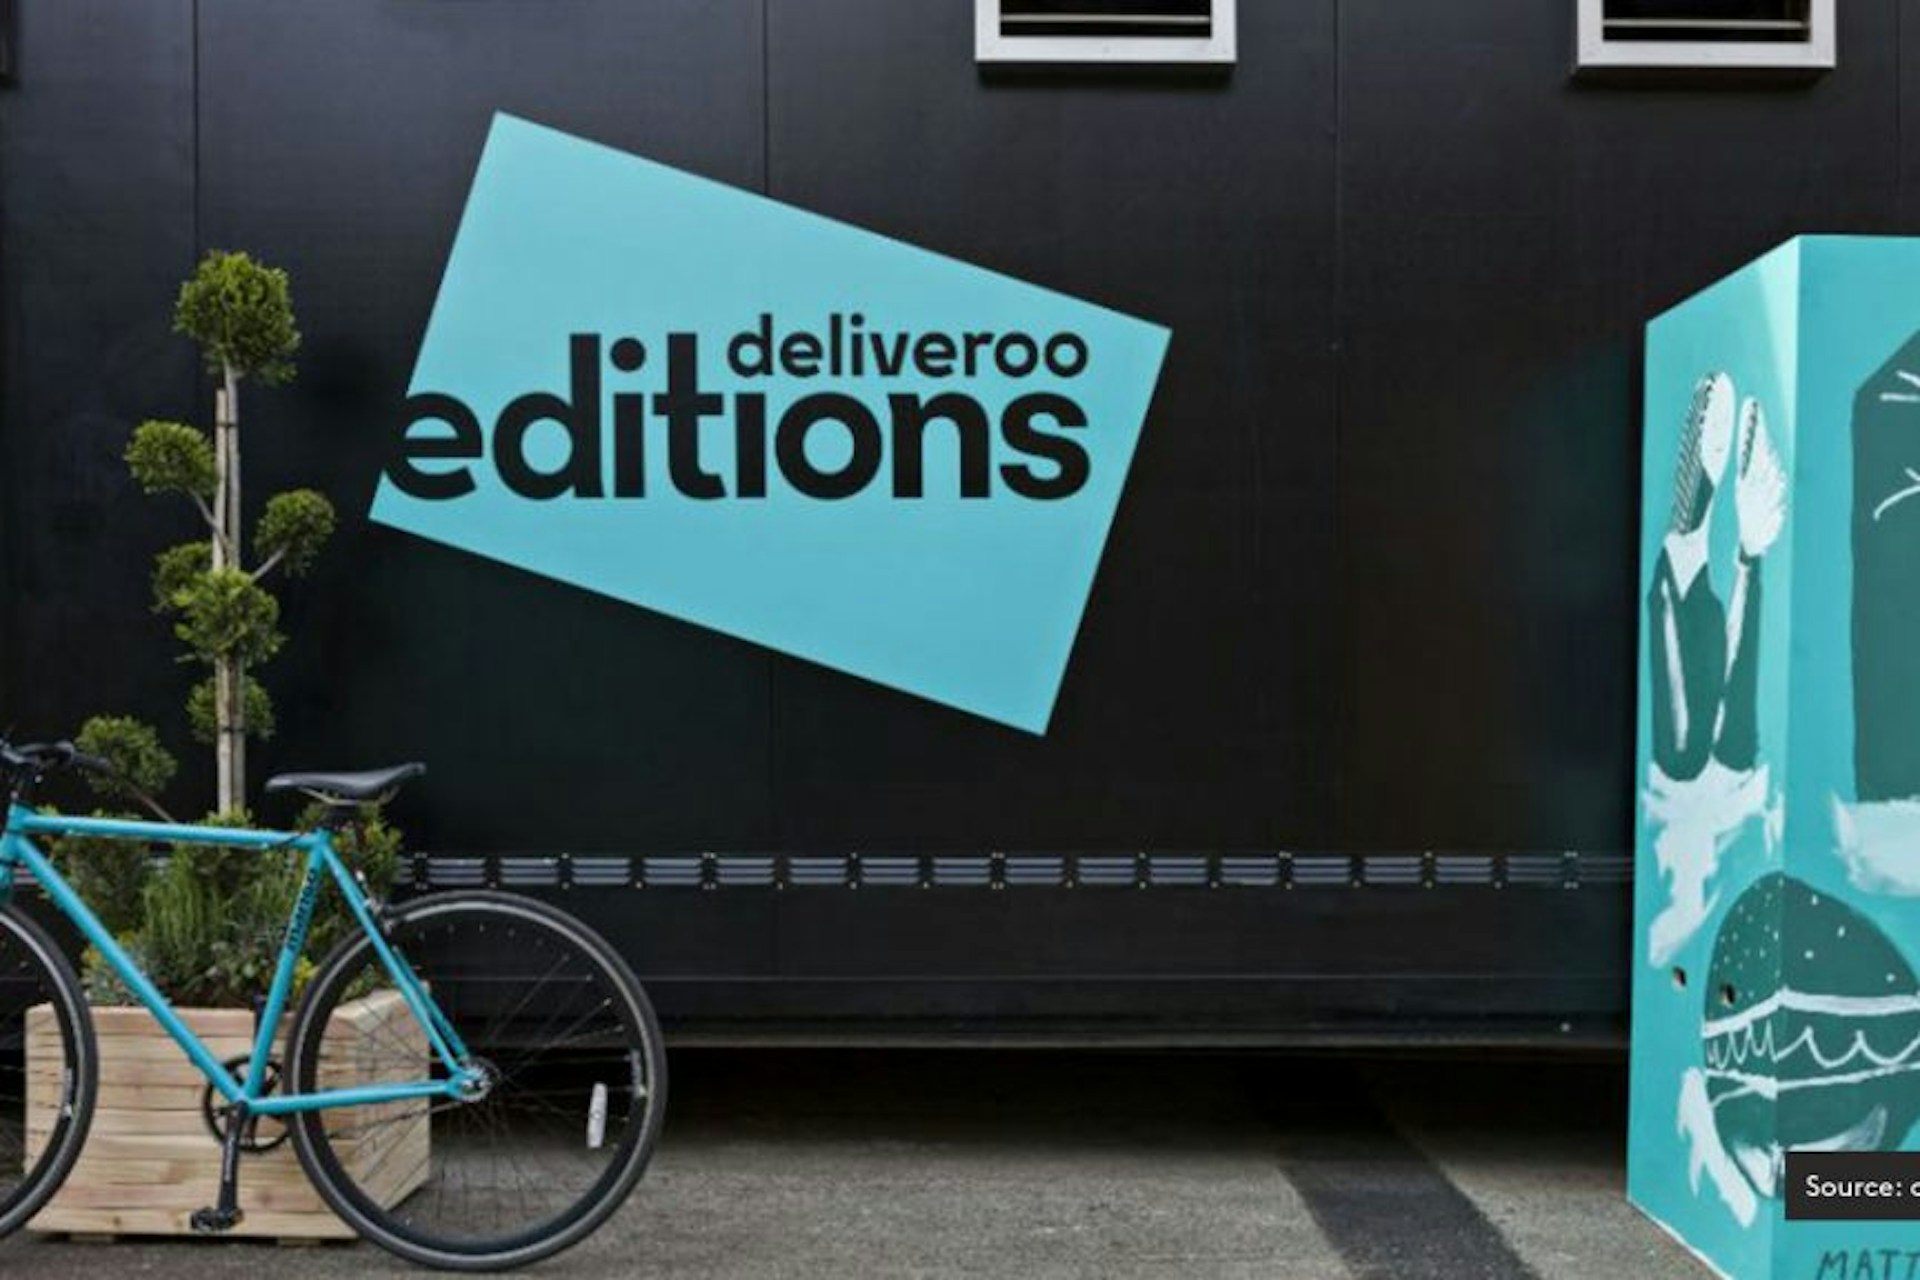 Deliveroo remains ahead of the competition by investing in resources that give it a competitive edge. However, the crux of the company’s success lies in its quick responses to customer concerns and demands, thanks to its data-driven decision-making processes.